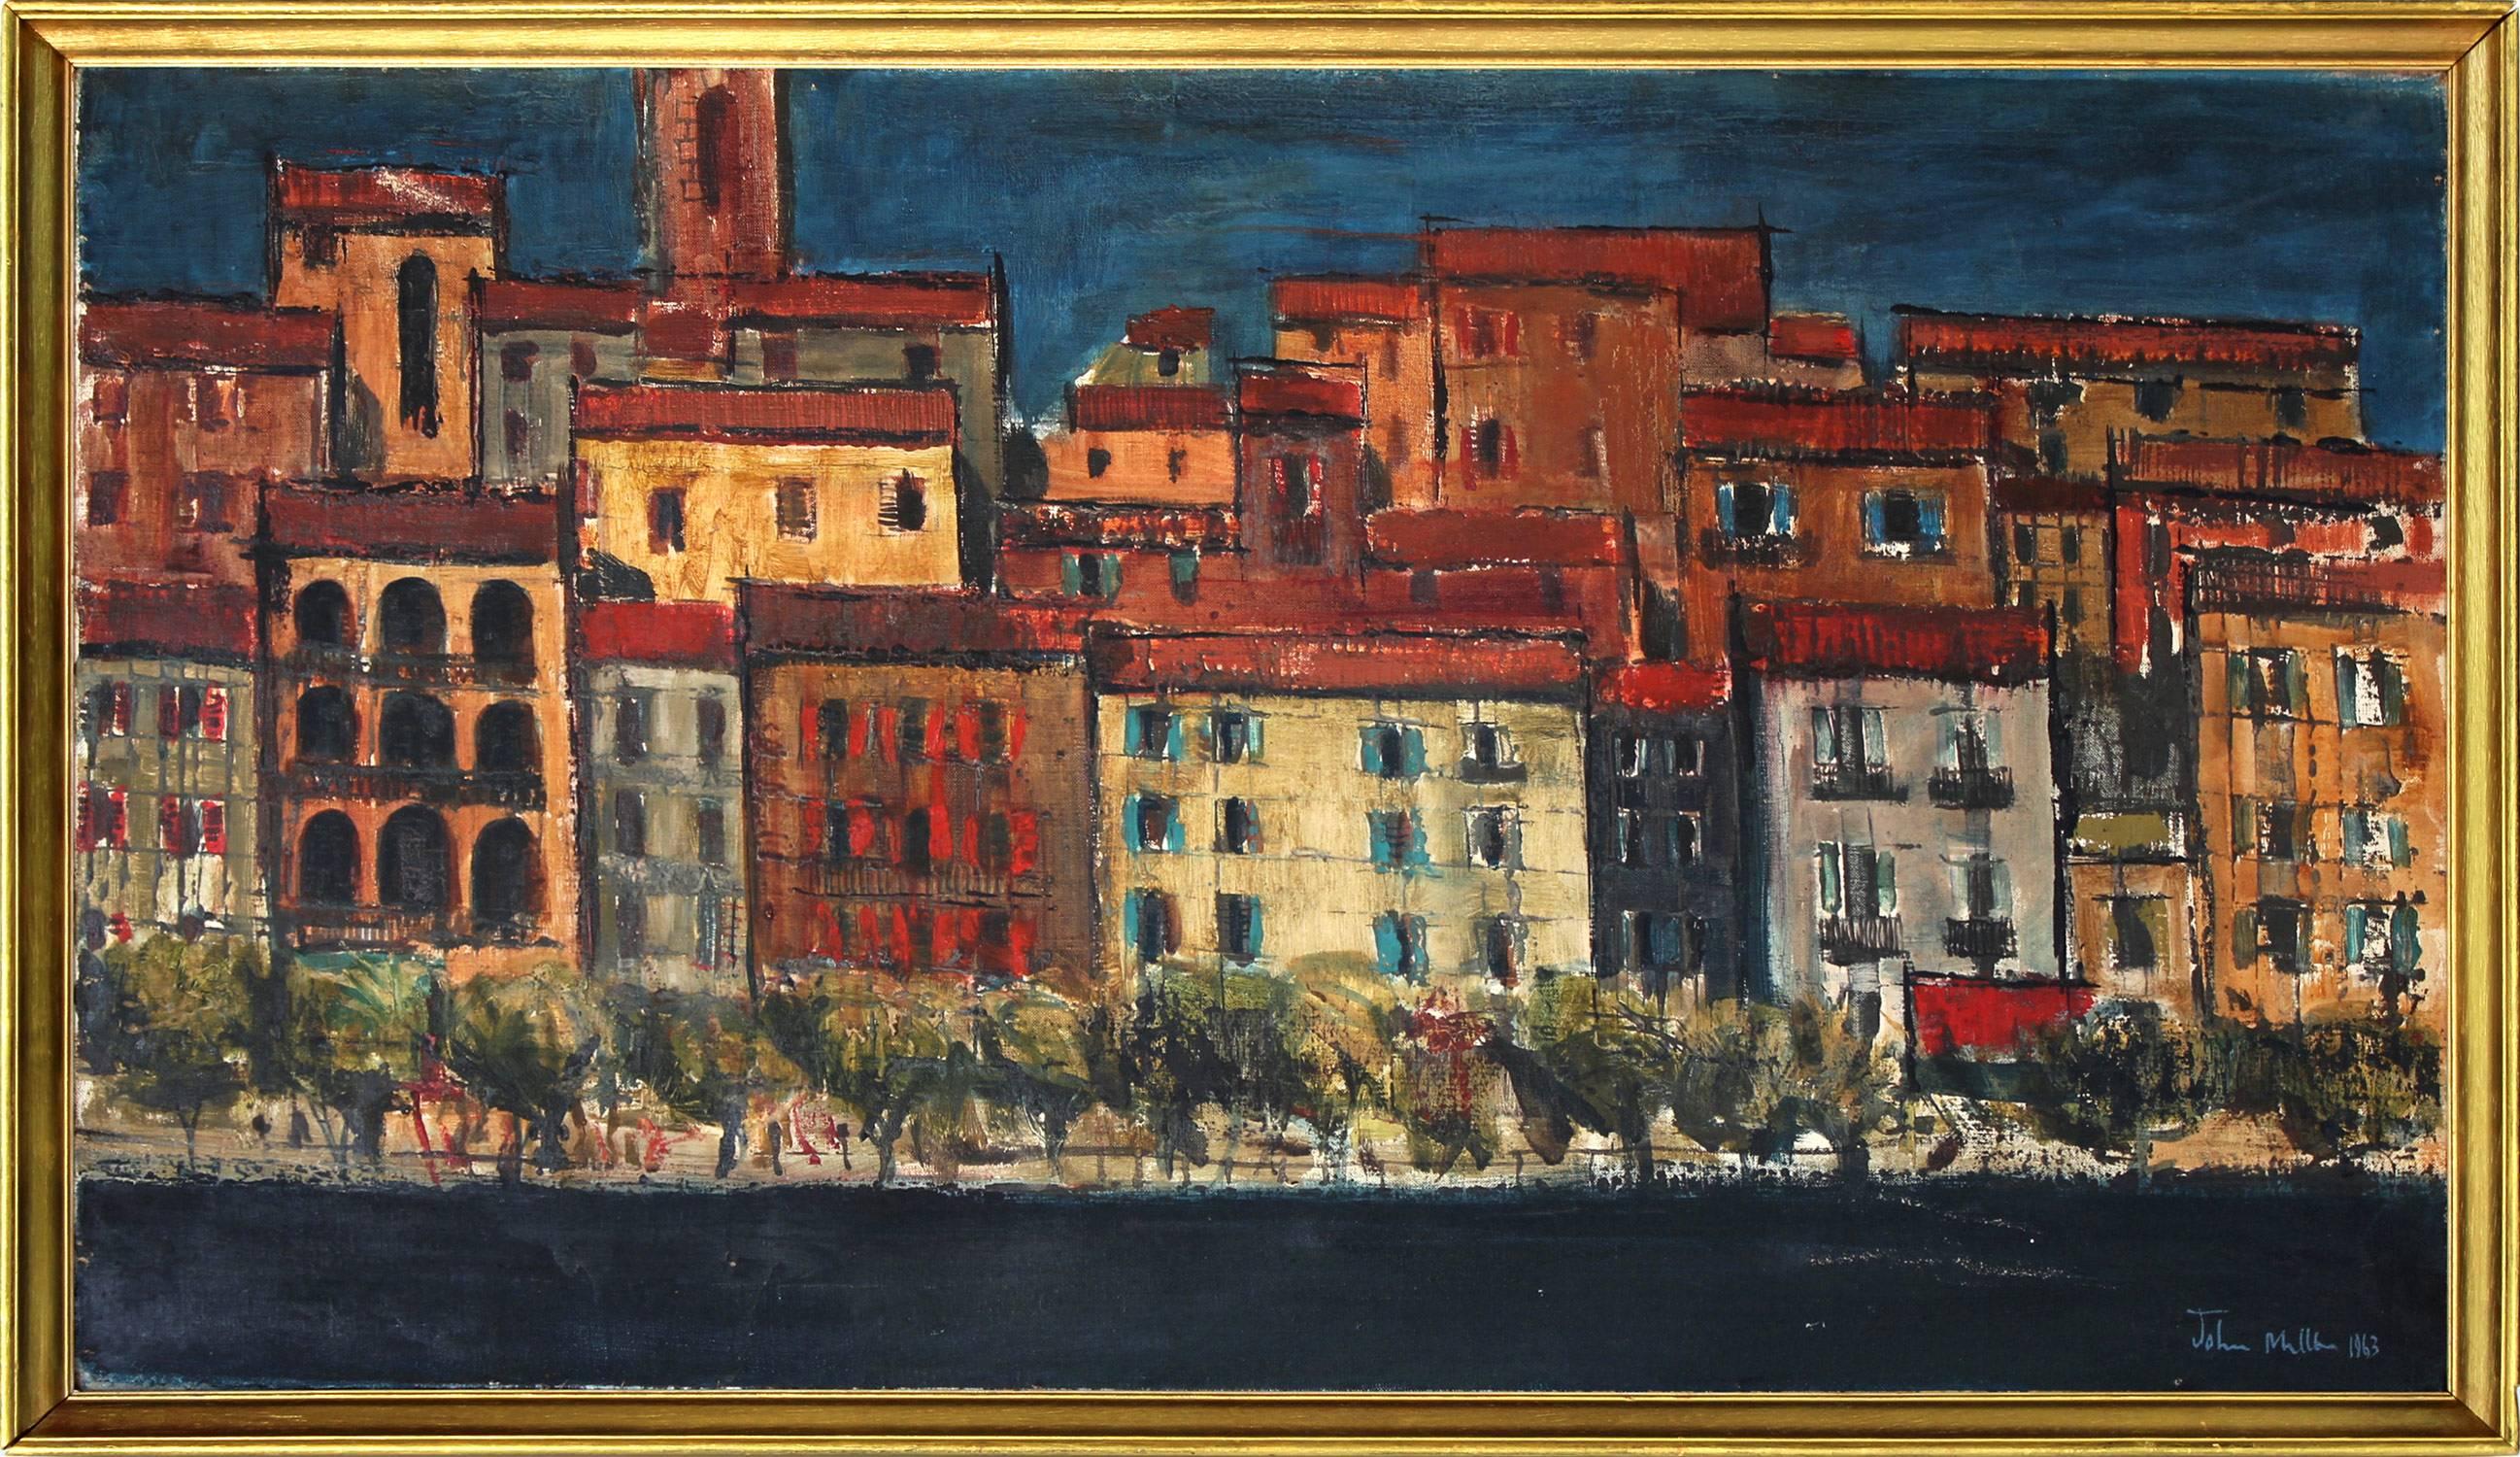 John Miller (b.1939) Landscape Painting - "Porto Santo Stefano" Mid Century Abstract Painting on Canvas of a Village View